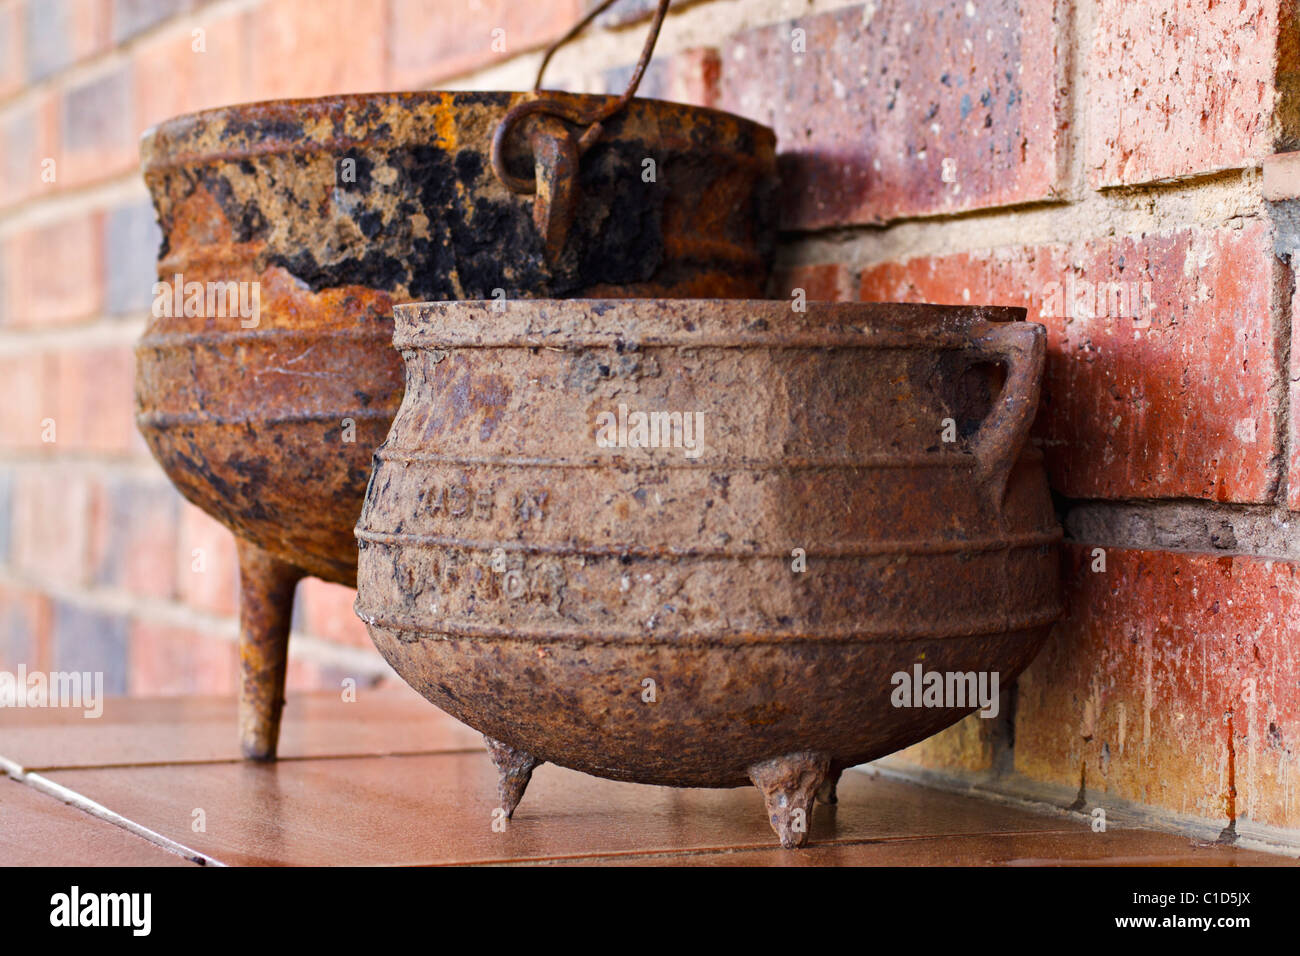 https://c8.alamy.com/comp/C1D5JX/traditional-cast-iron-three-legged-cooking-pots-from-south-africa-C1D5JX.jpg